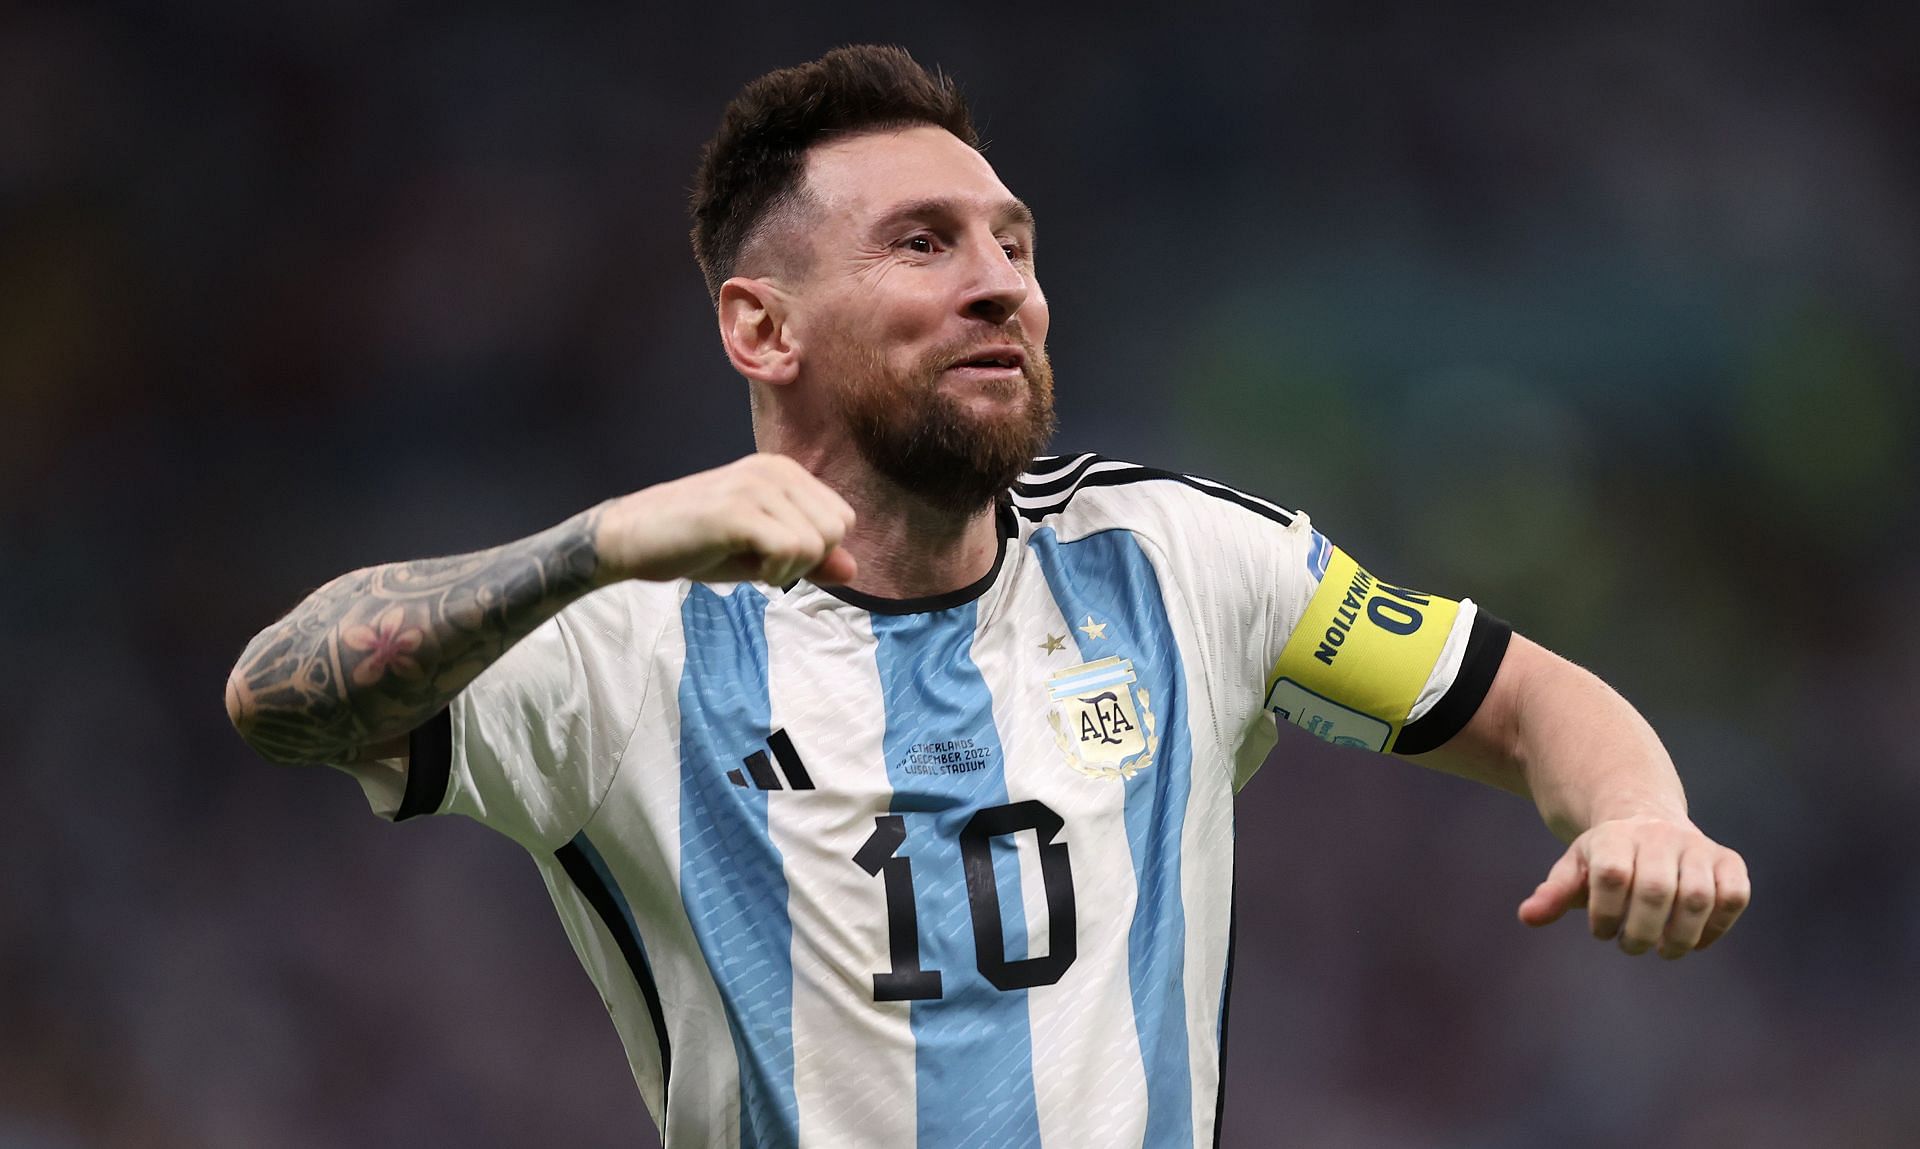 An exuberant Lionel Messi celebrates his goal against the Netherlands at the 2022 FIFA World Cup.